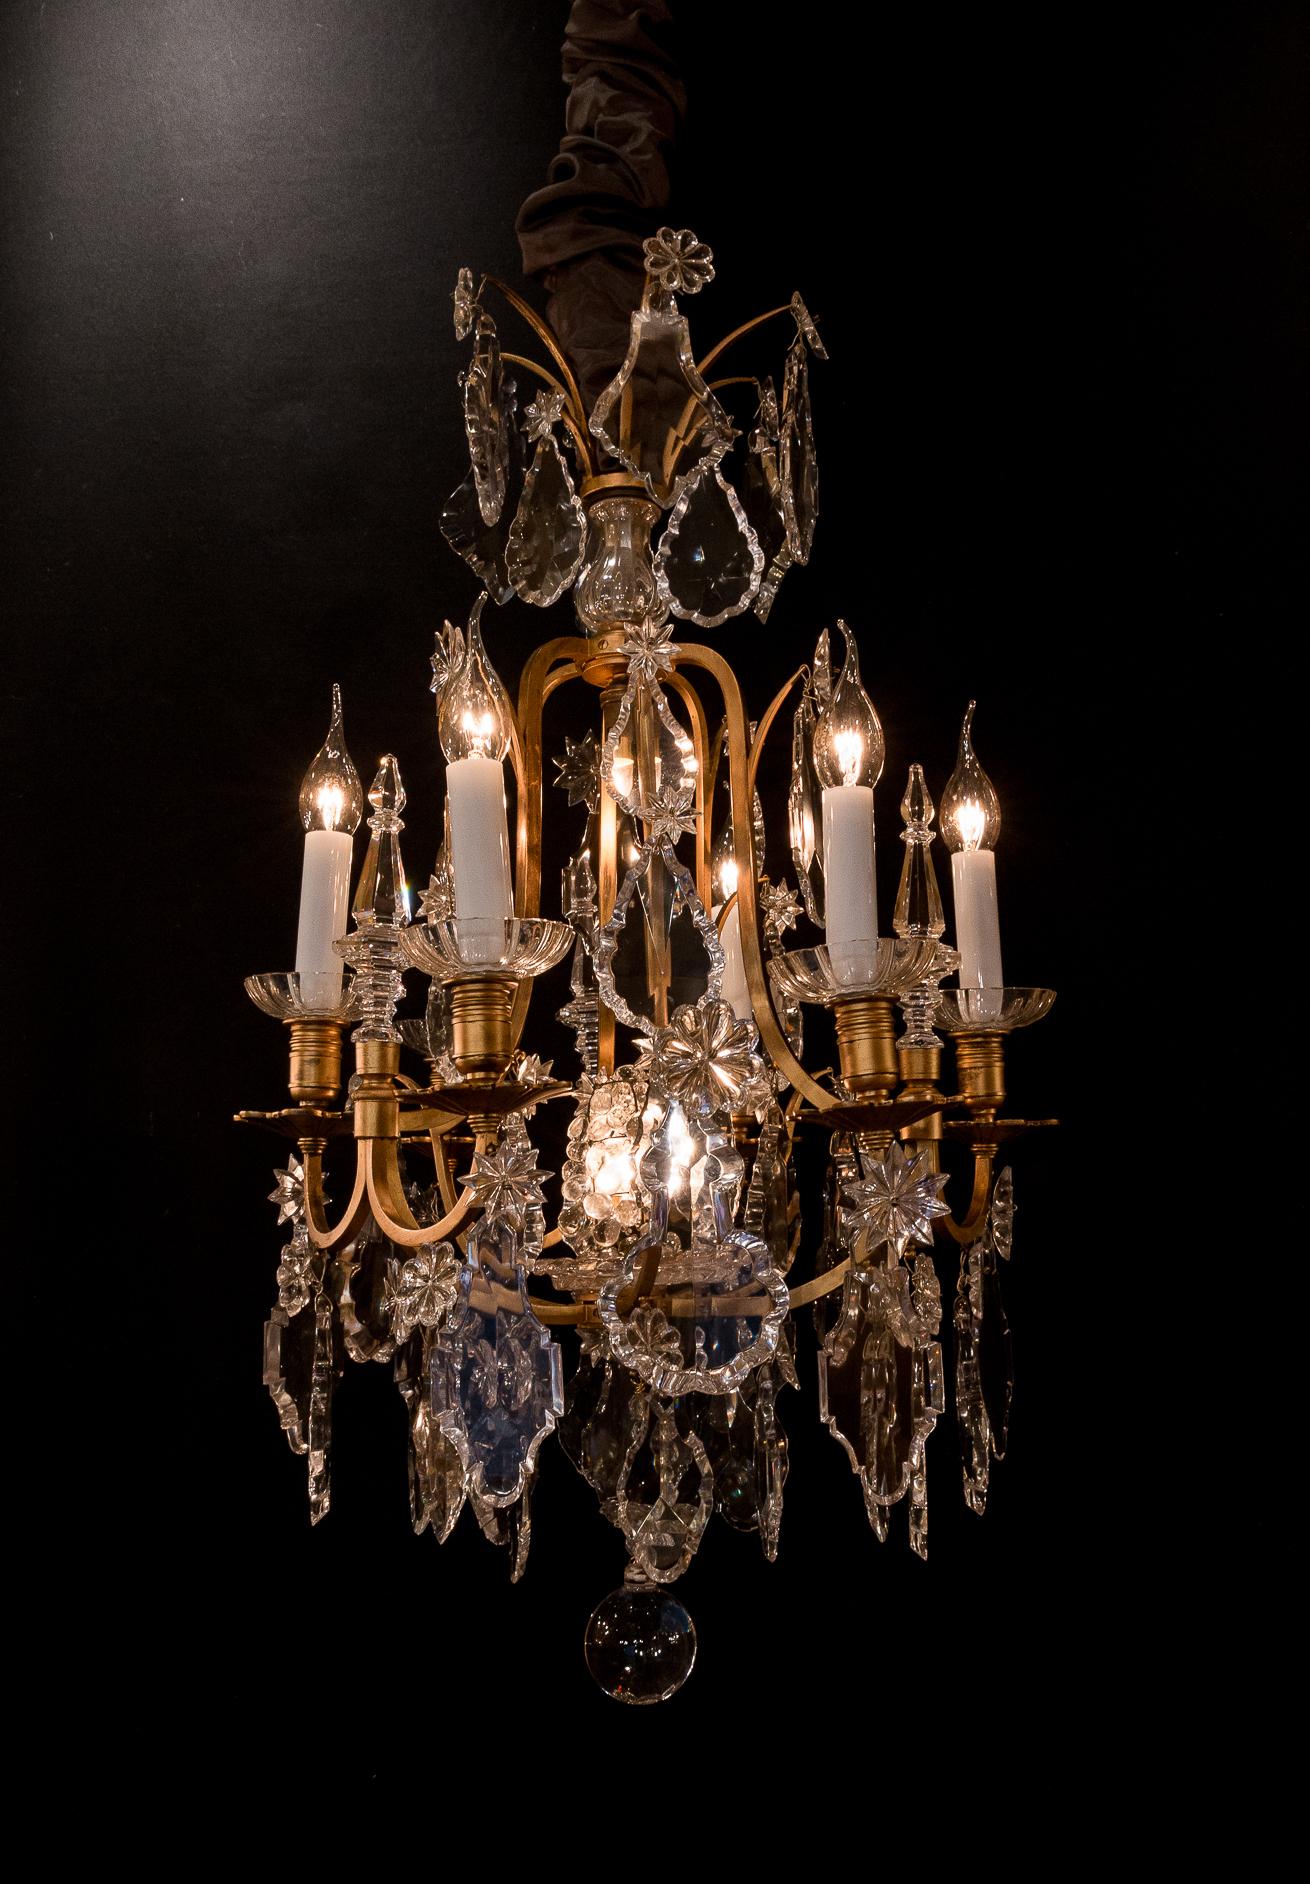 Baccarat signed - French Louis XV style, patinated-bronze and crystal chandelier, circa 1900.

Lovely patinated gilt-bronze and crystal chandelier in the classic French Louis XV style, signed by The Cristalleries de Baccarat.
Our chandelier is